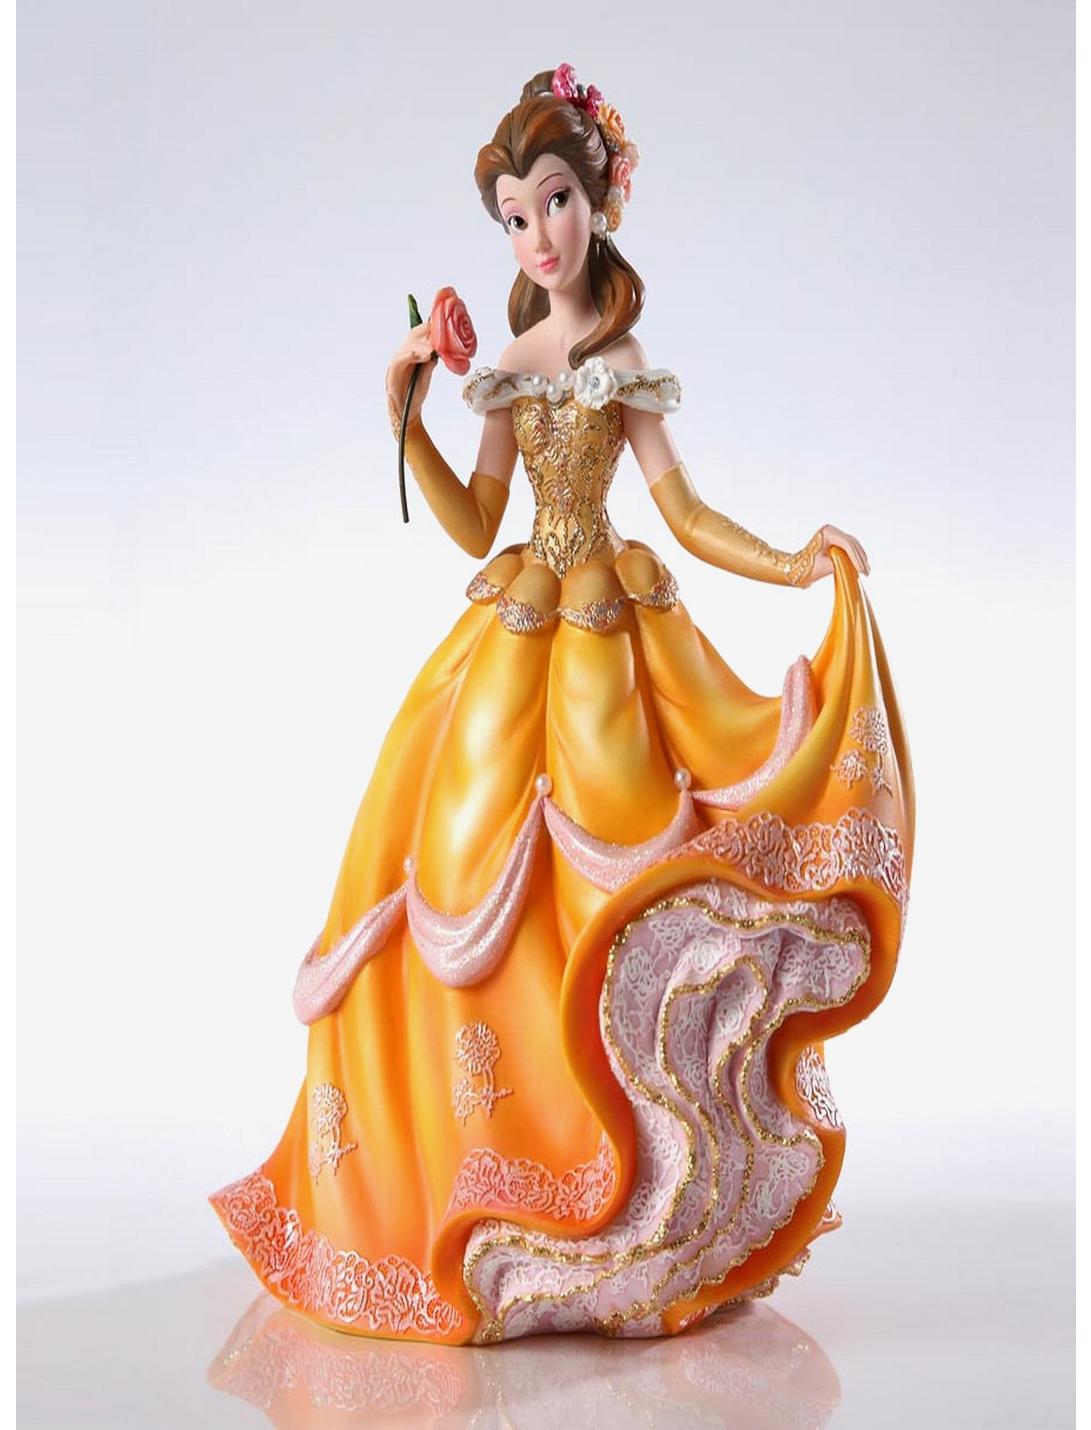 Disney Beauty And The Beast Belle Couture de Force Figure, , hi-res